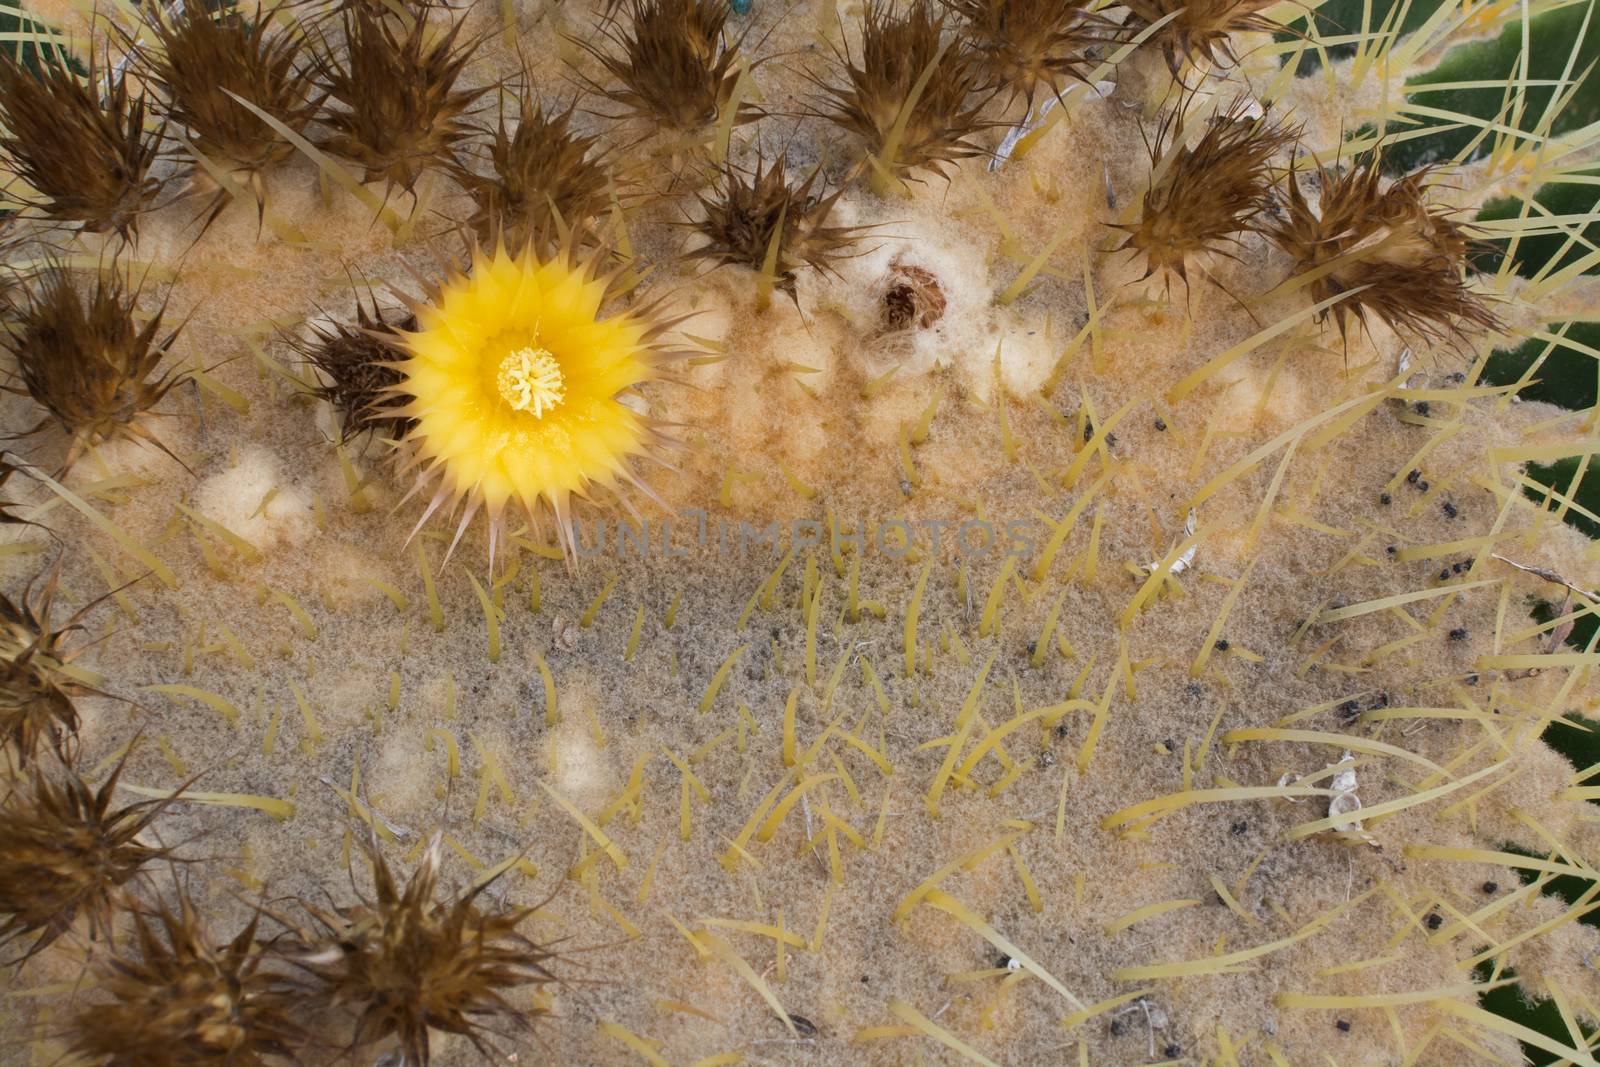 Yellow cactus flower and thorny surface.